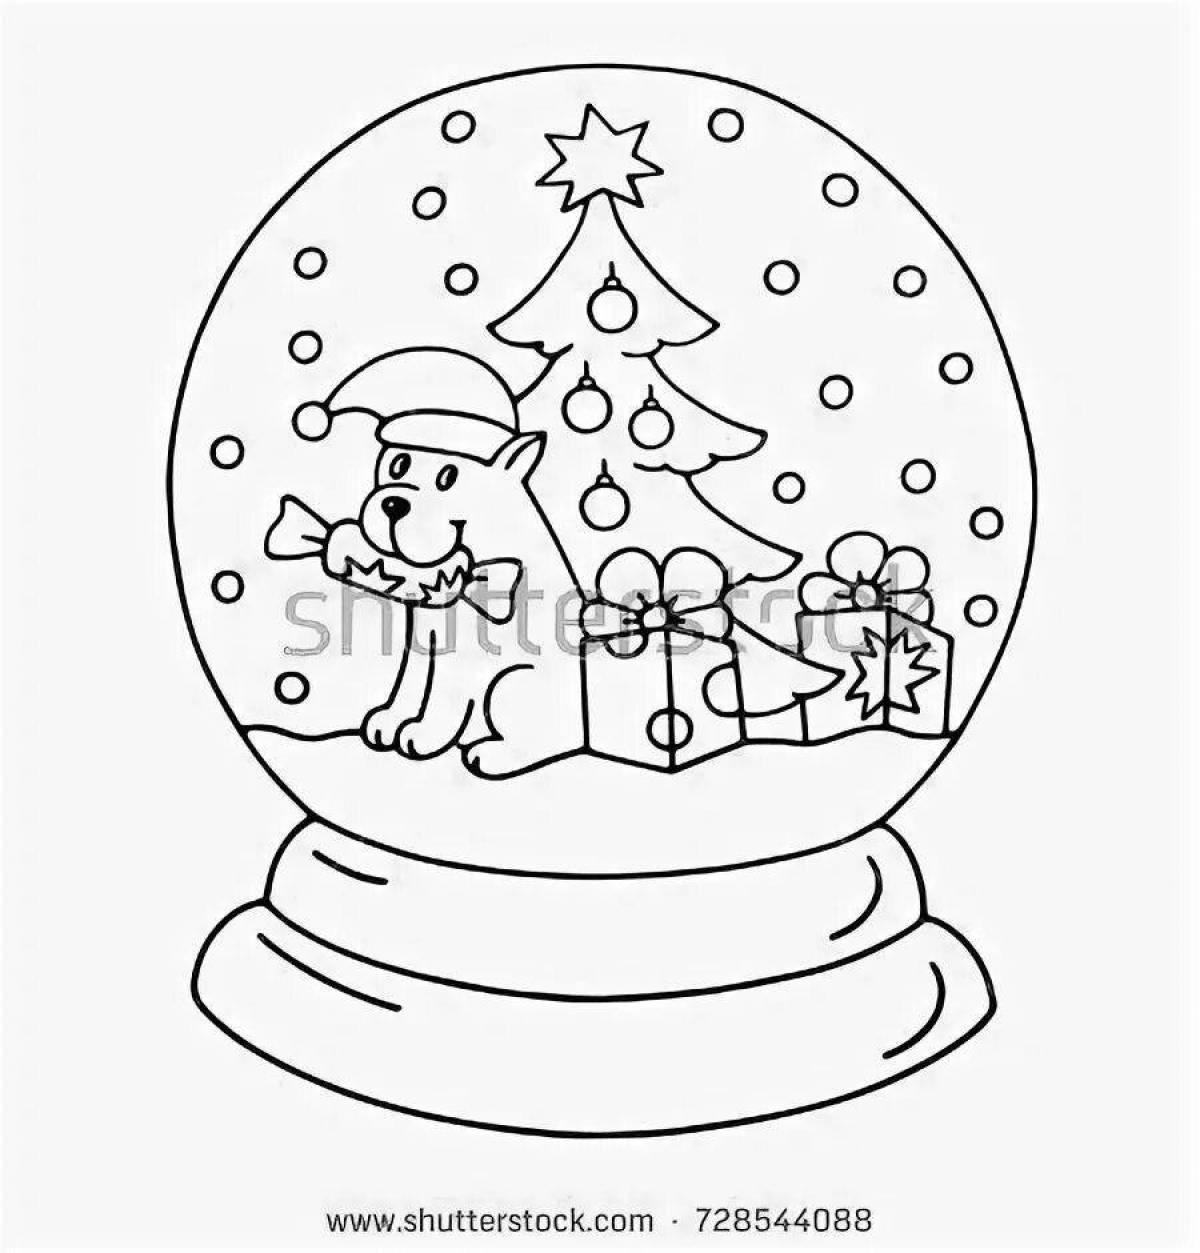 Coloring page wild winter ball